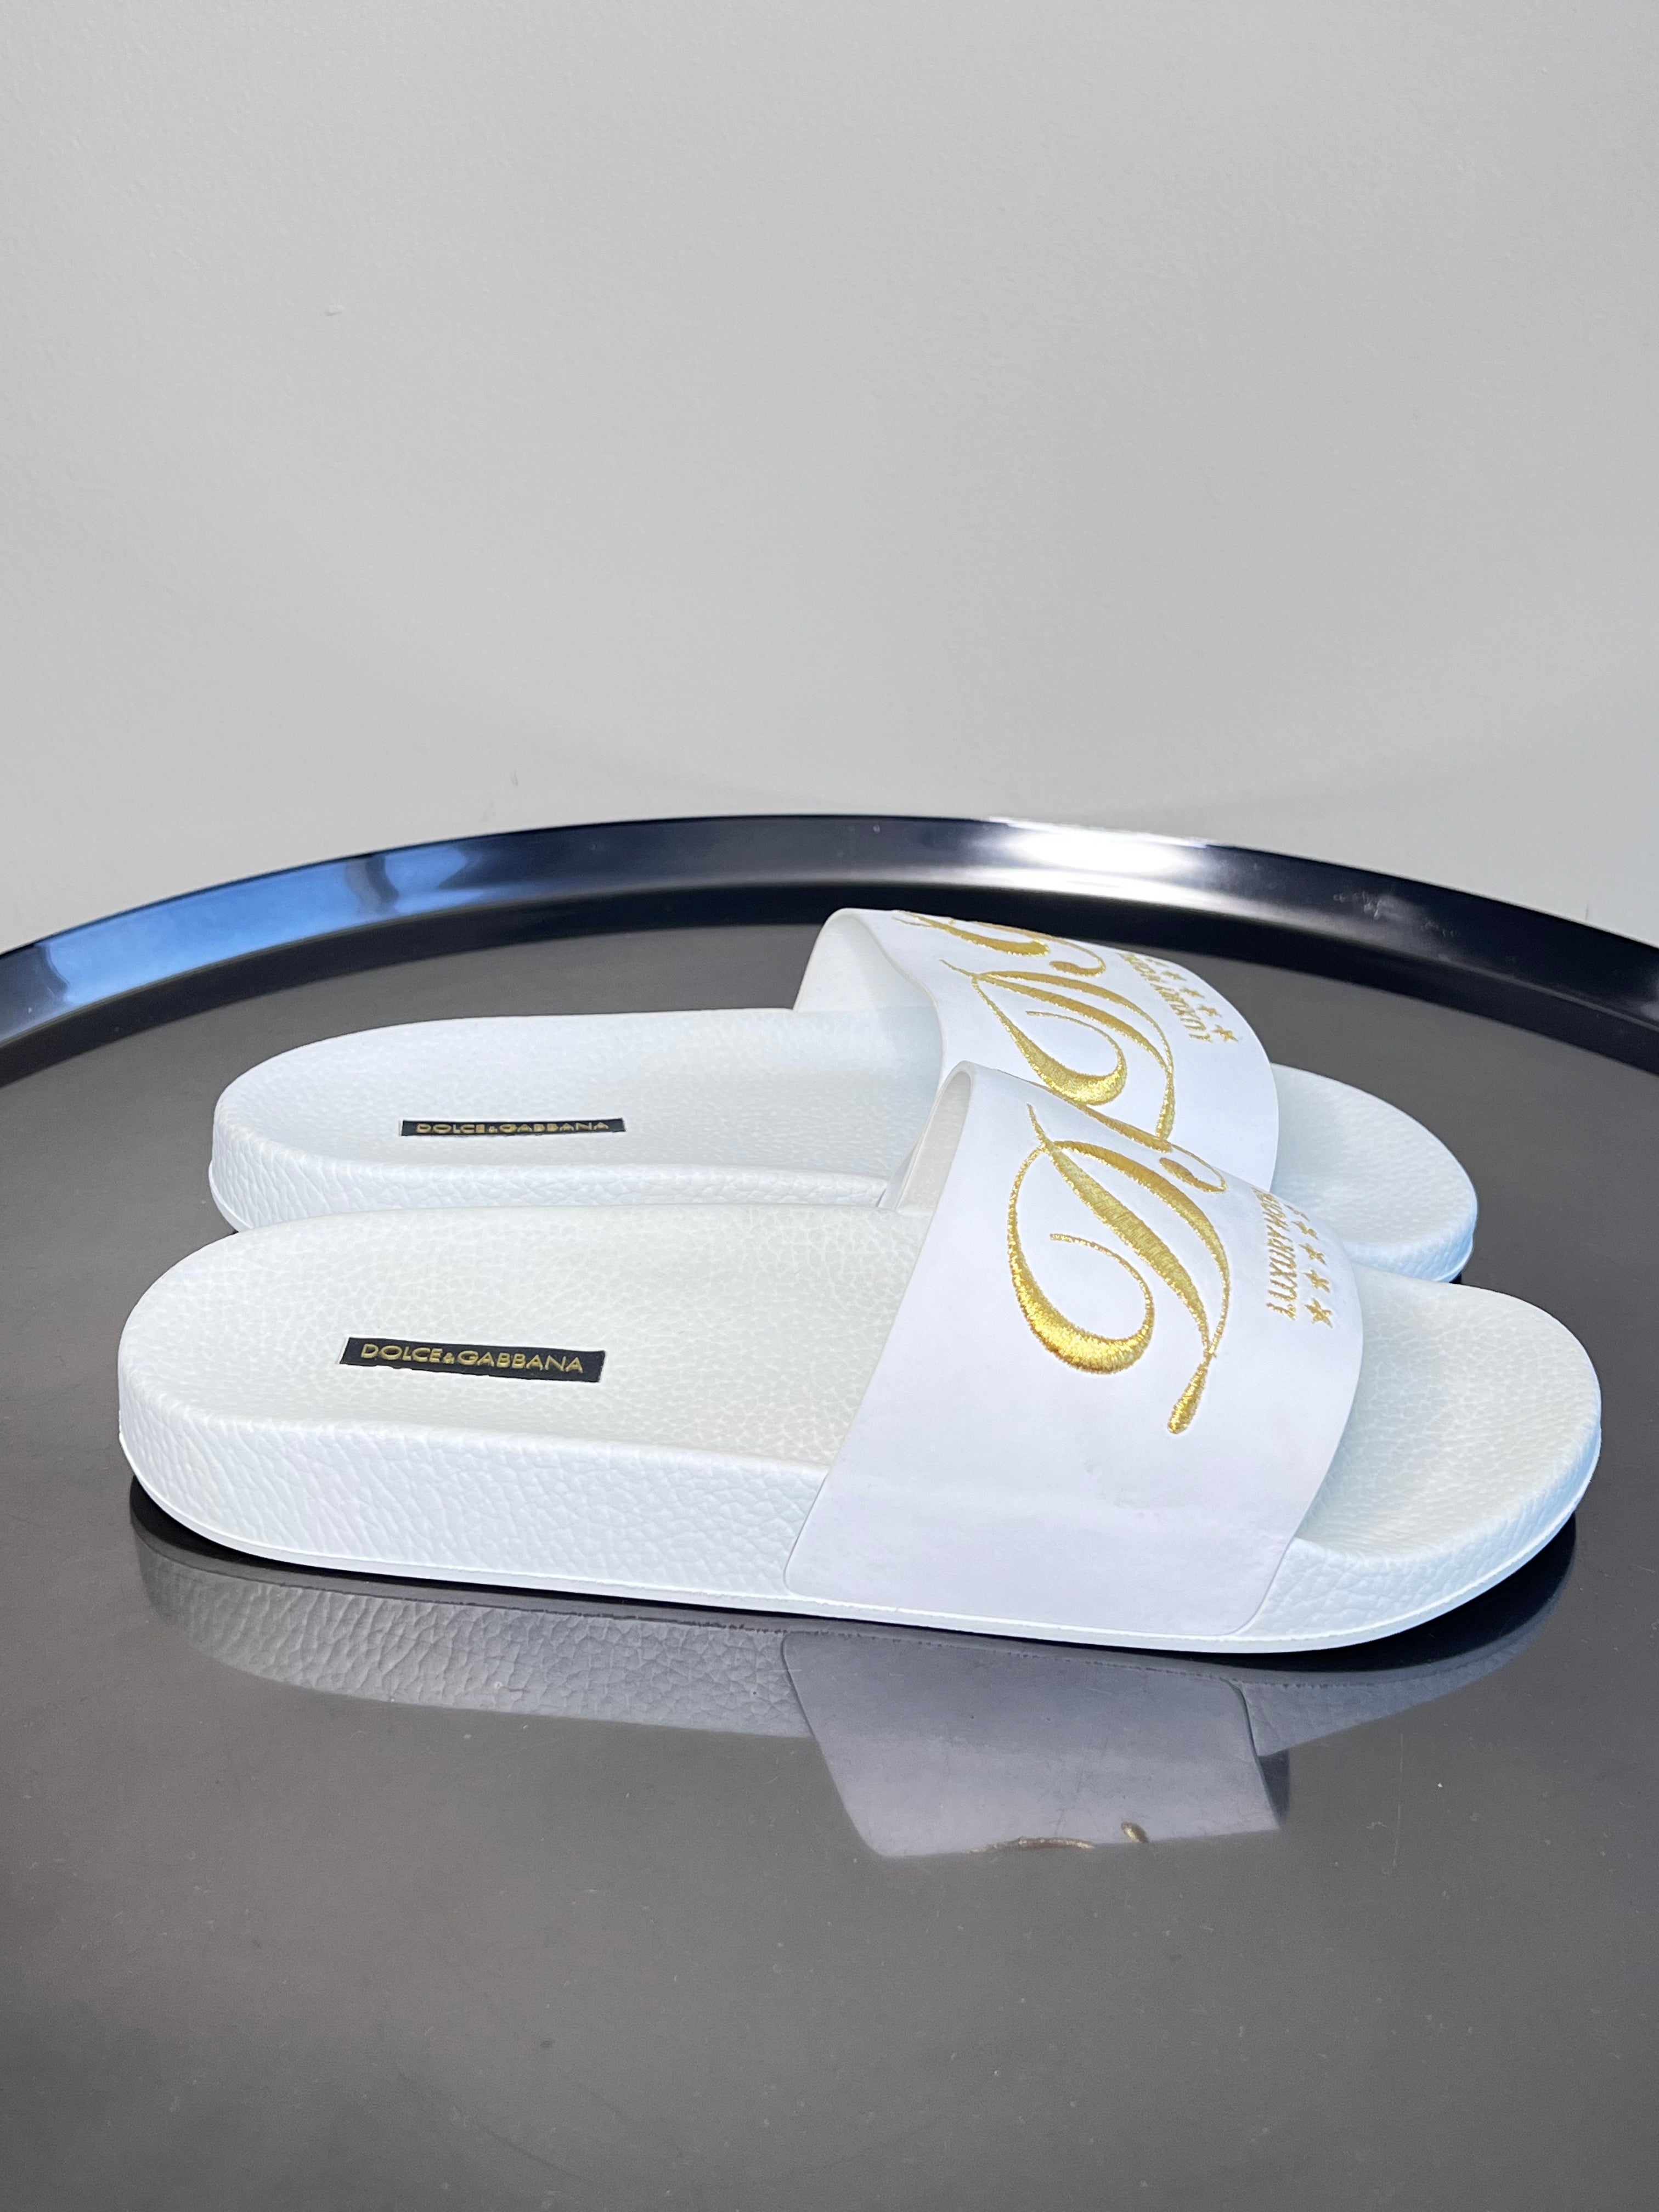 Brand New ! White slides with gold embroied logo - Dolce and gabbana